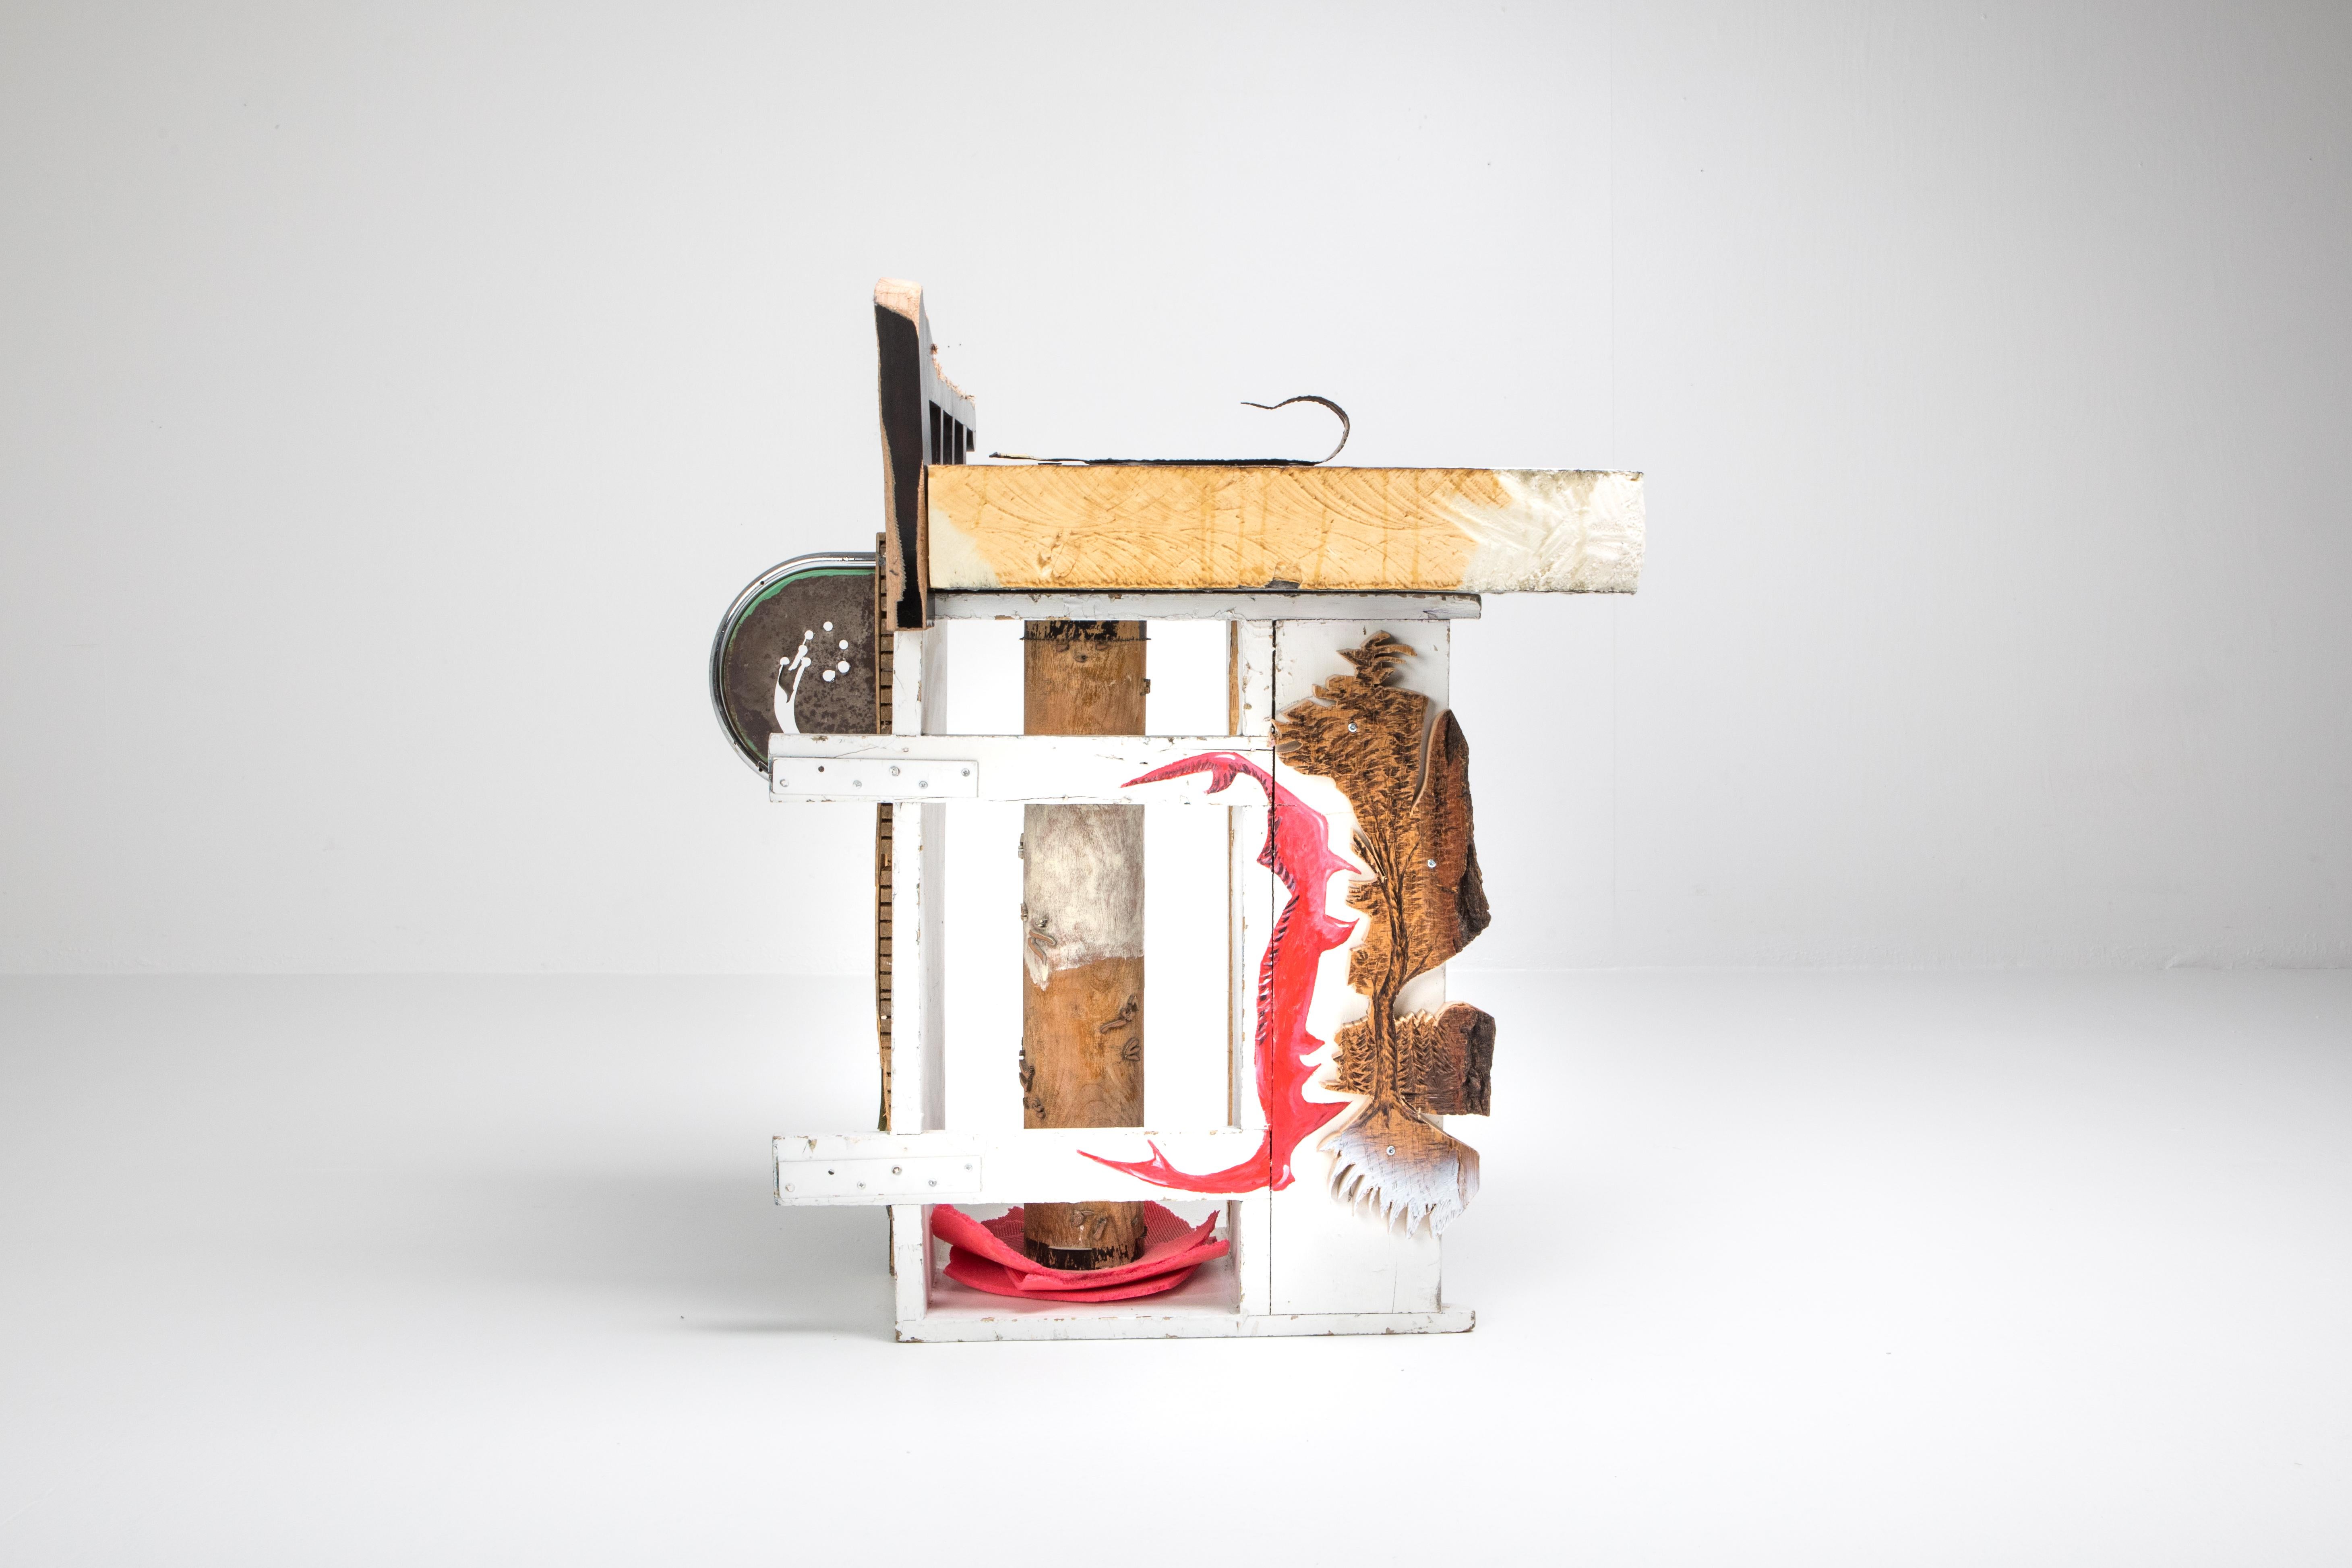 Contemporary side table, collage art, Messgewand, 2019, France

La Sonate Indélébile is a contemporary functional art object created by Messgewand, the duo of Alexis Bondoux, and Romain Coppin. The one of a kind item was part of the solo